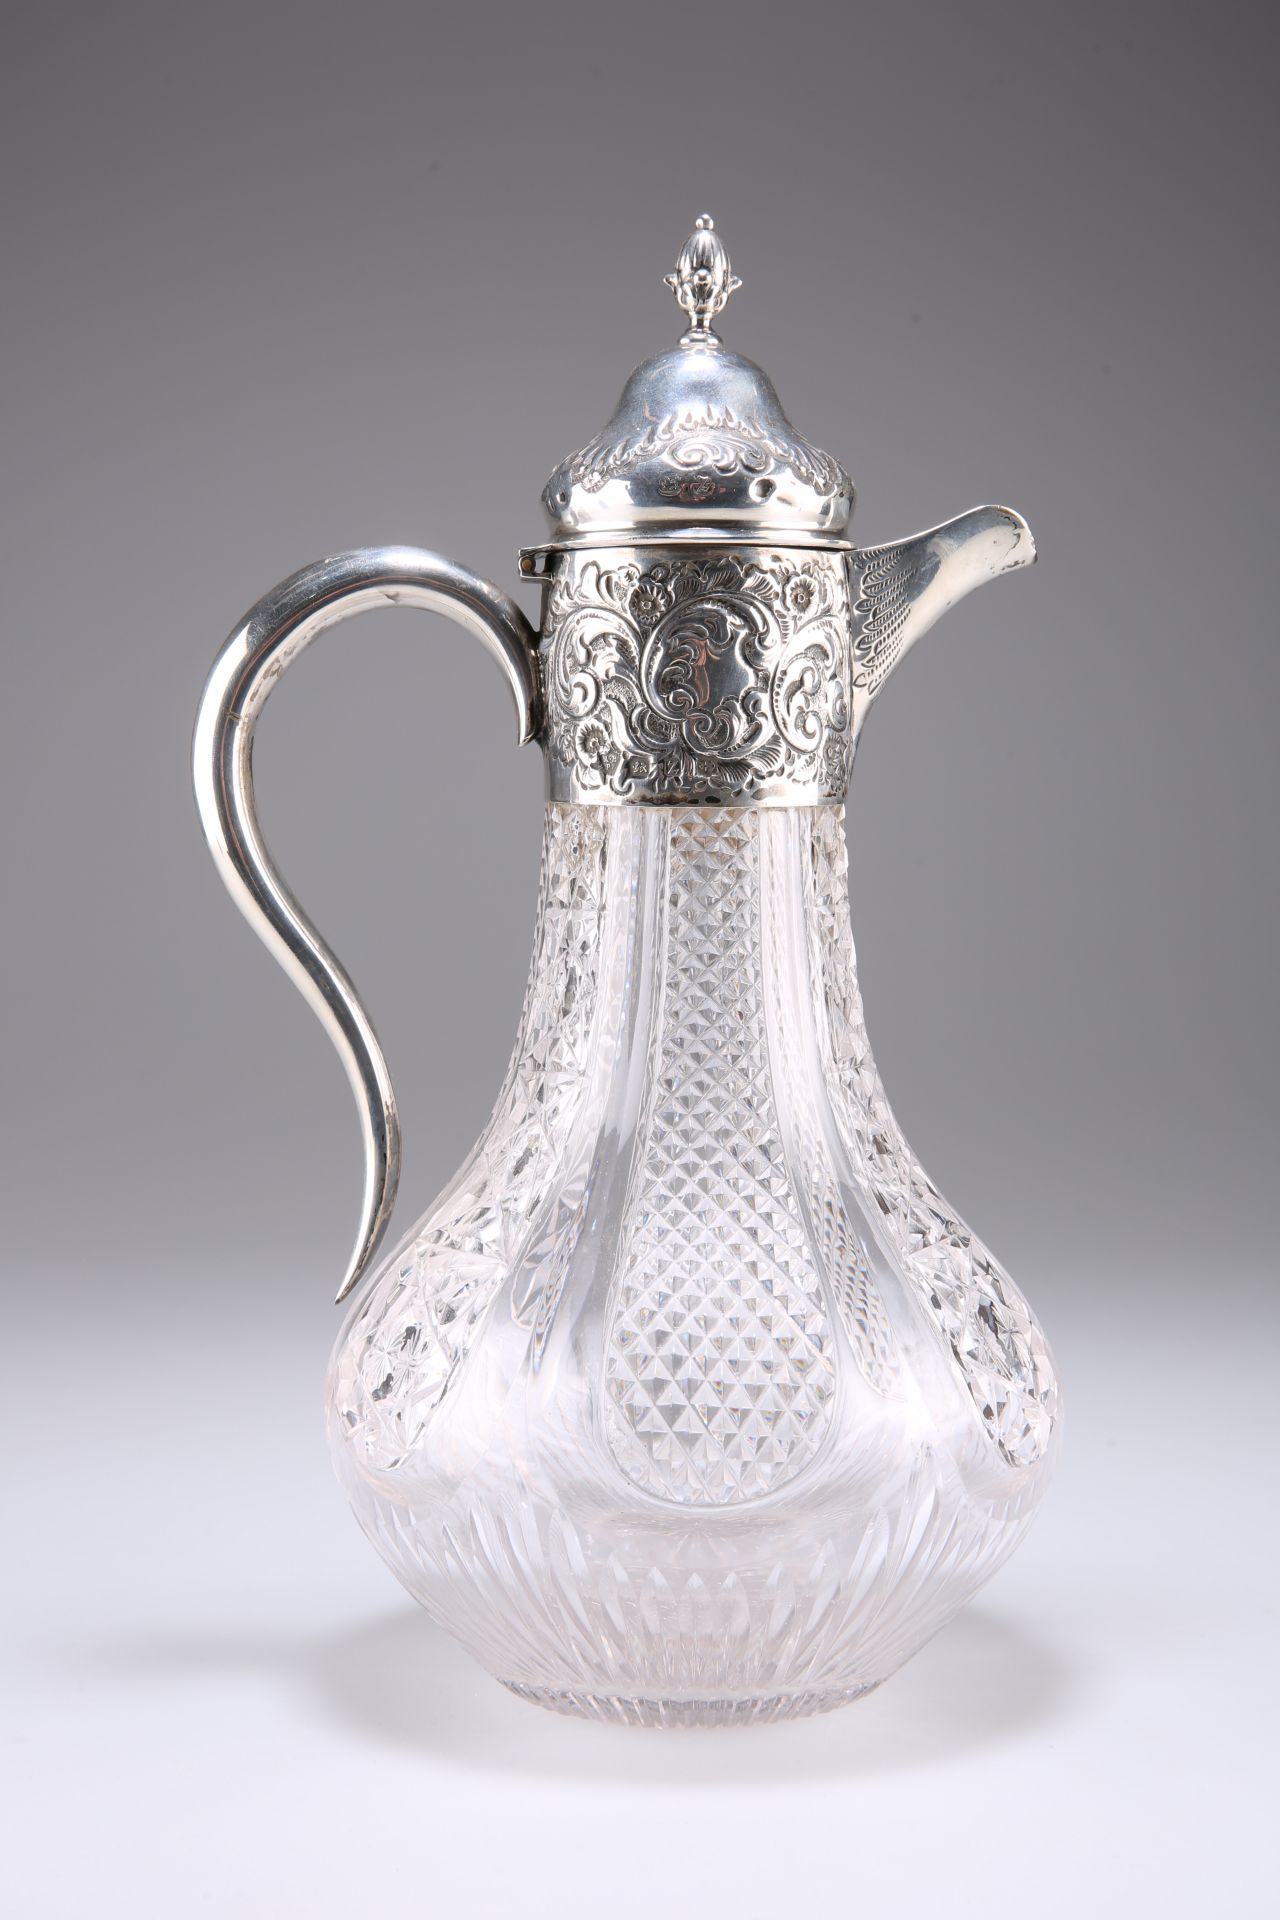 A LATE VICTORIAN SILVER-MOUNTED CUT-GLASS CLARET JUG